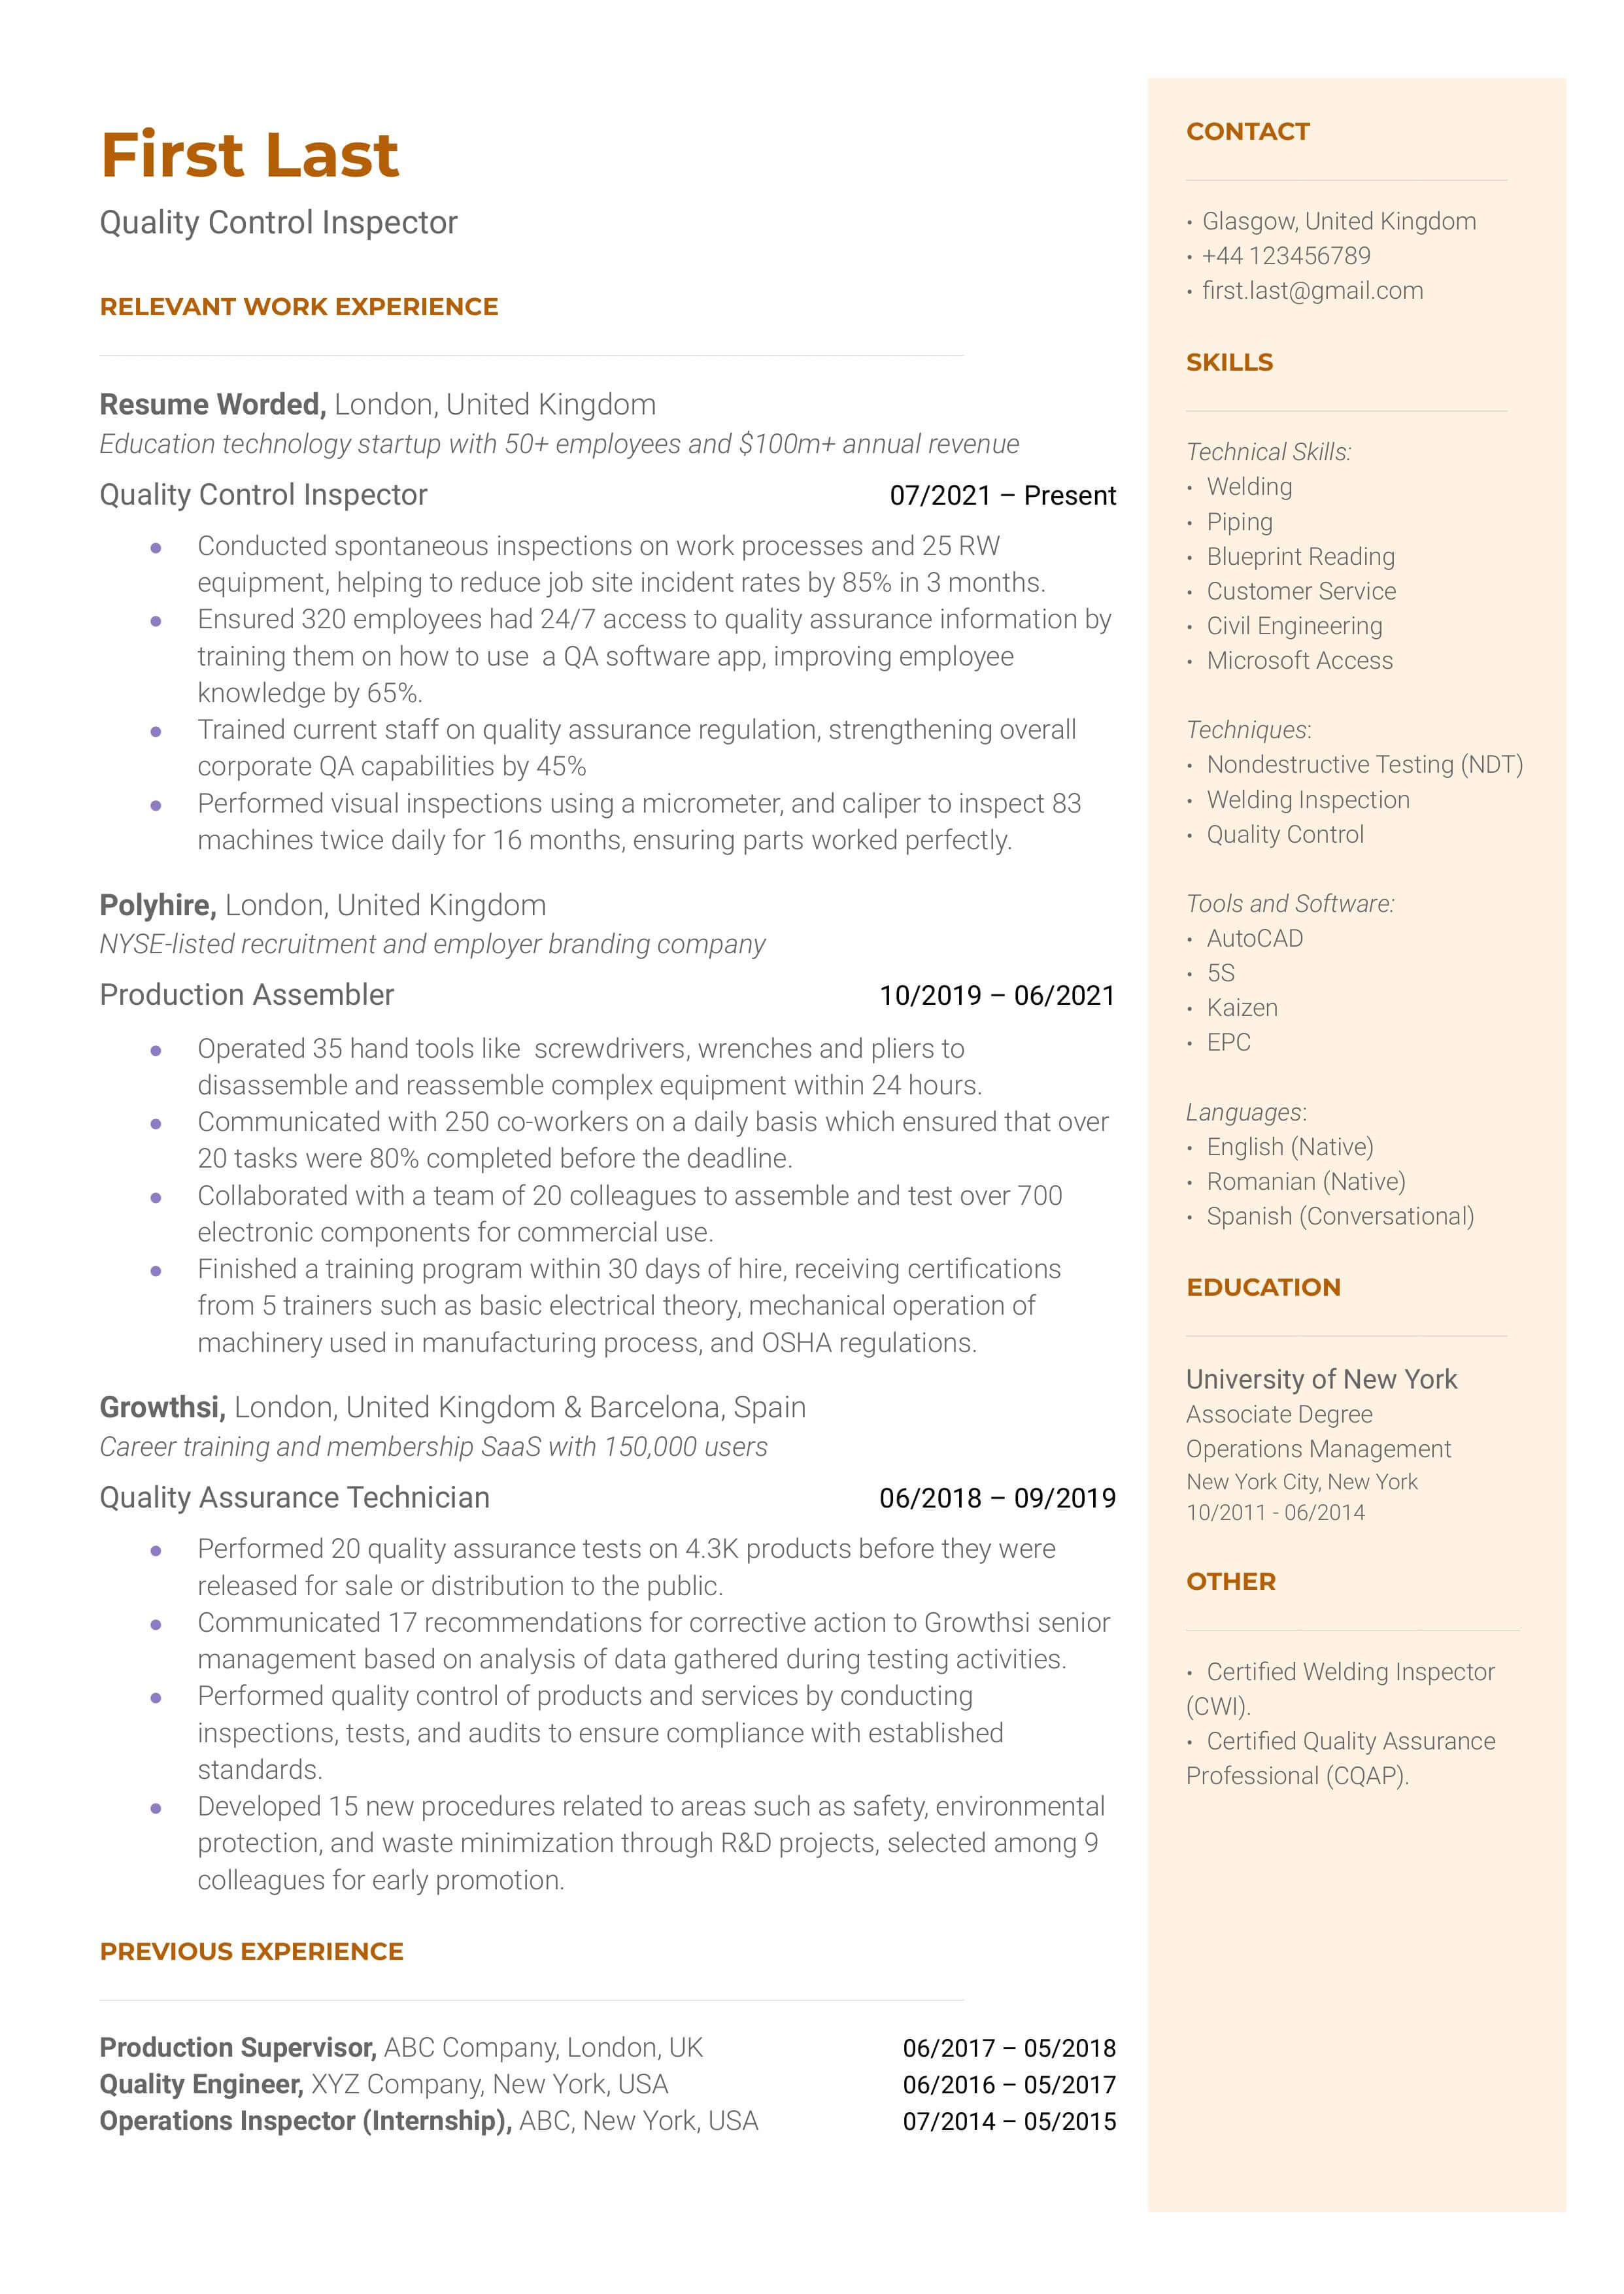 CV sample for a Quality Control Inspector role.